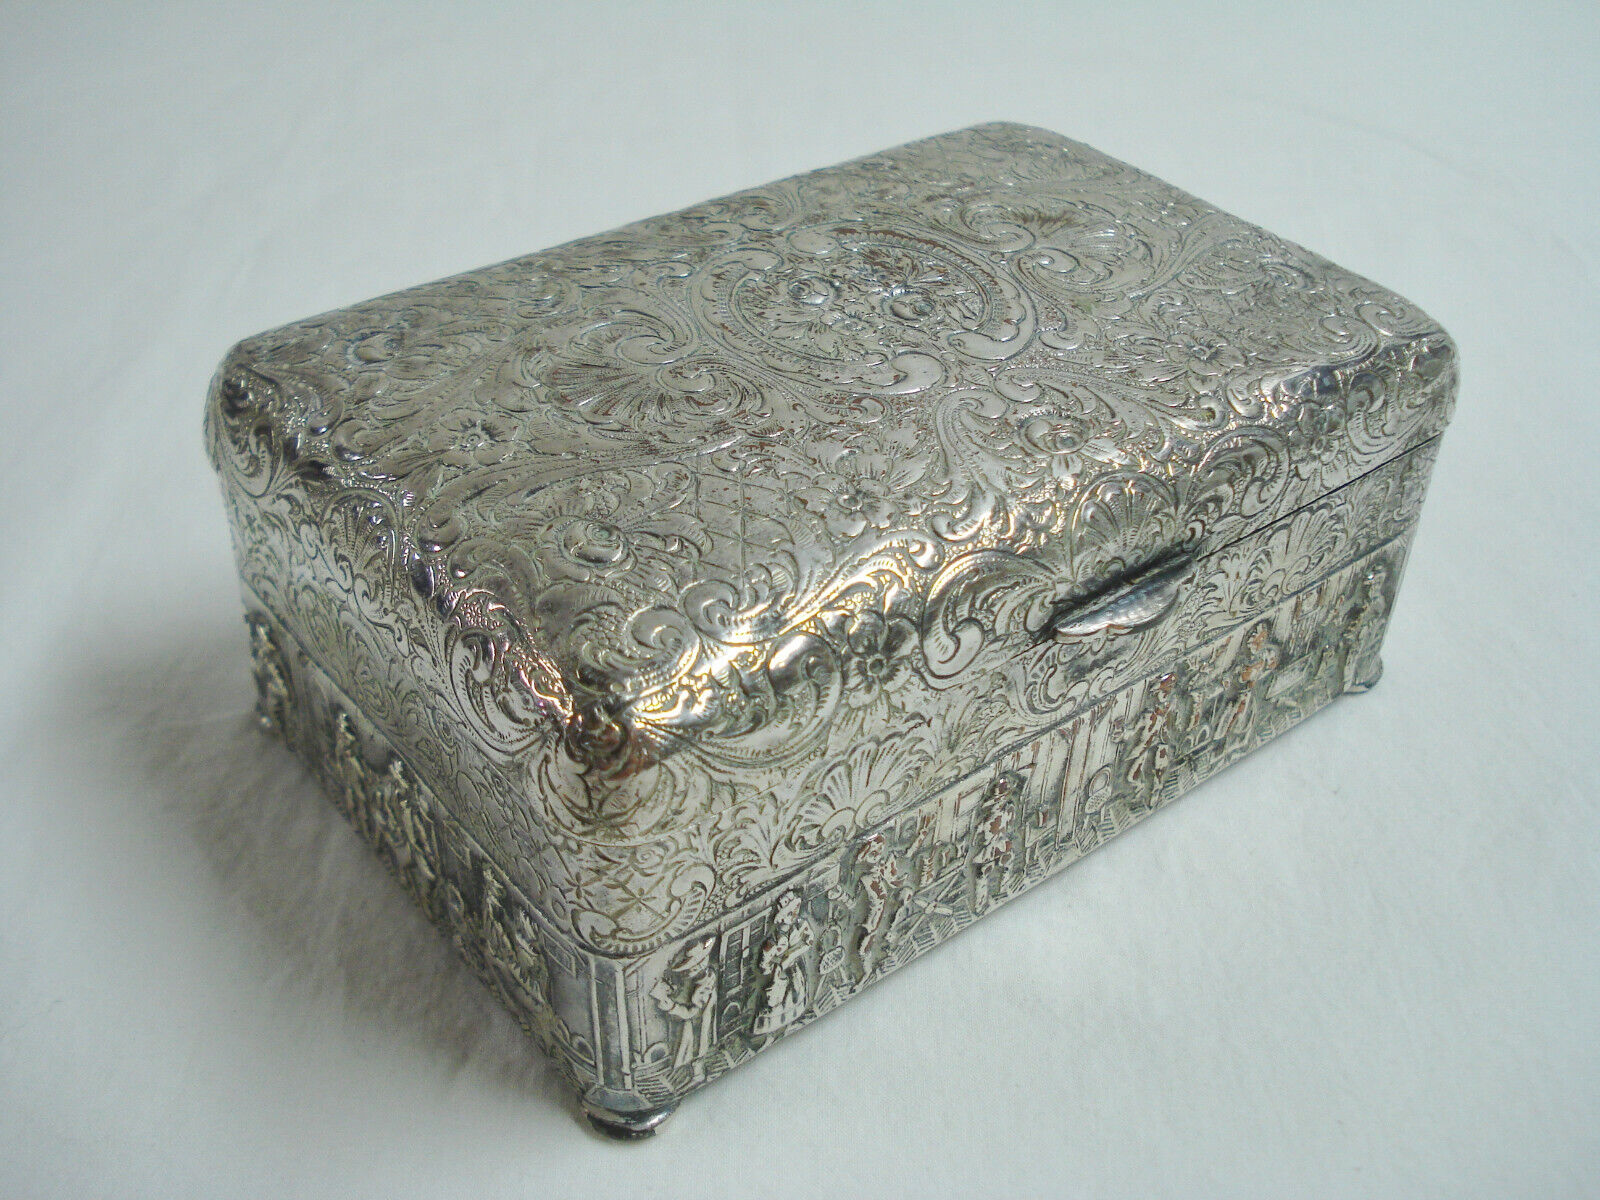 EG Webster & Son Silver Plate Cigarette Box Embossed Repousse Dancing Wedding